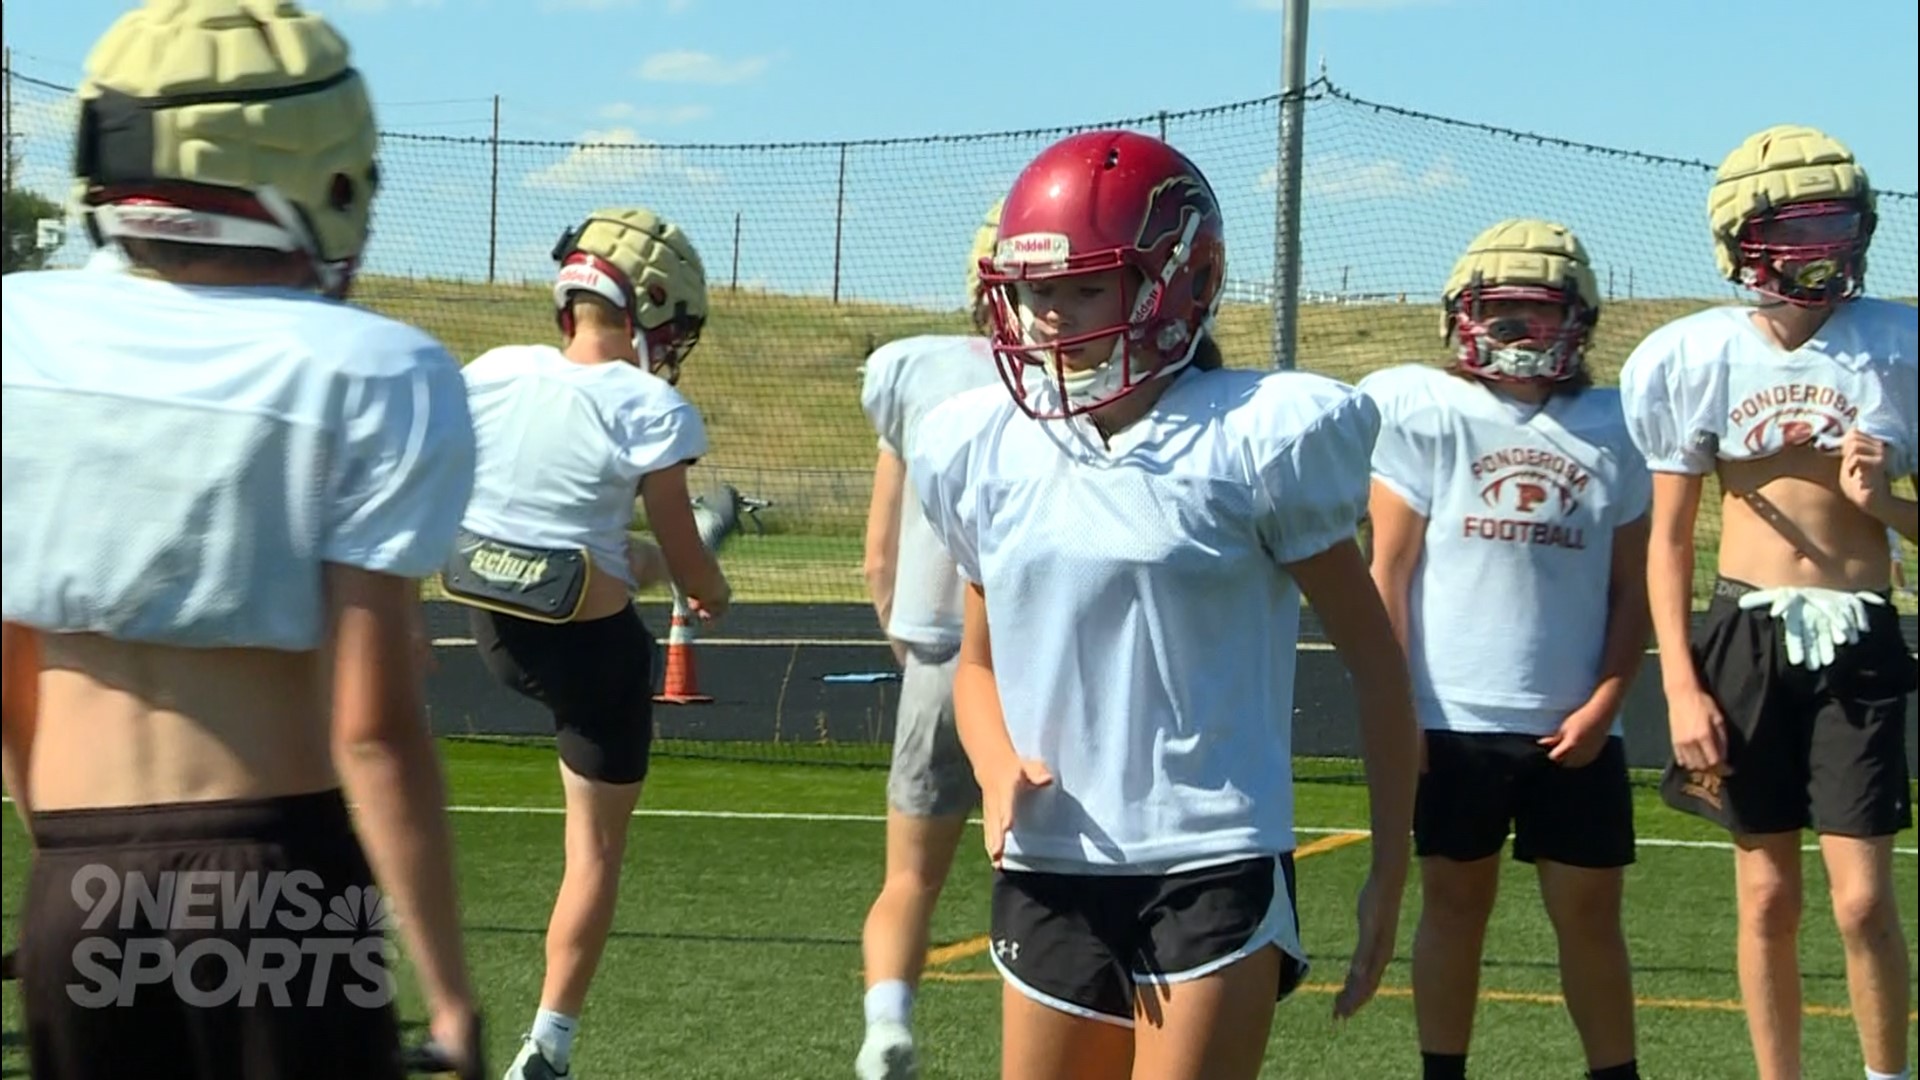 Riley Fitzgibbon has found her passion on the football field, becoming the first female player for Ponderosa varsity football